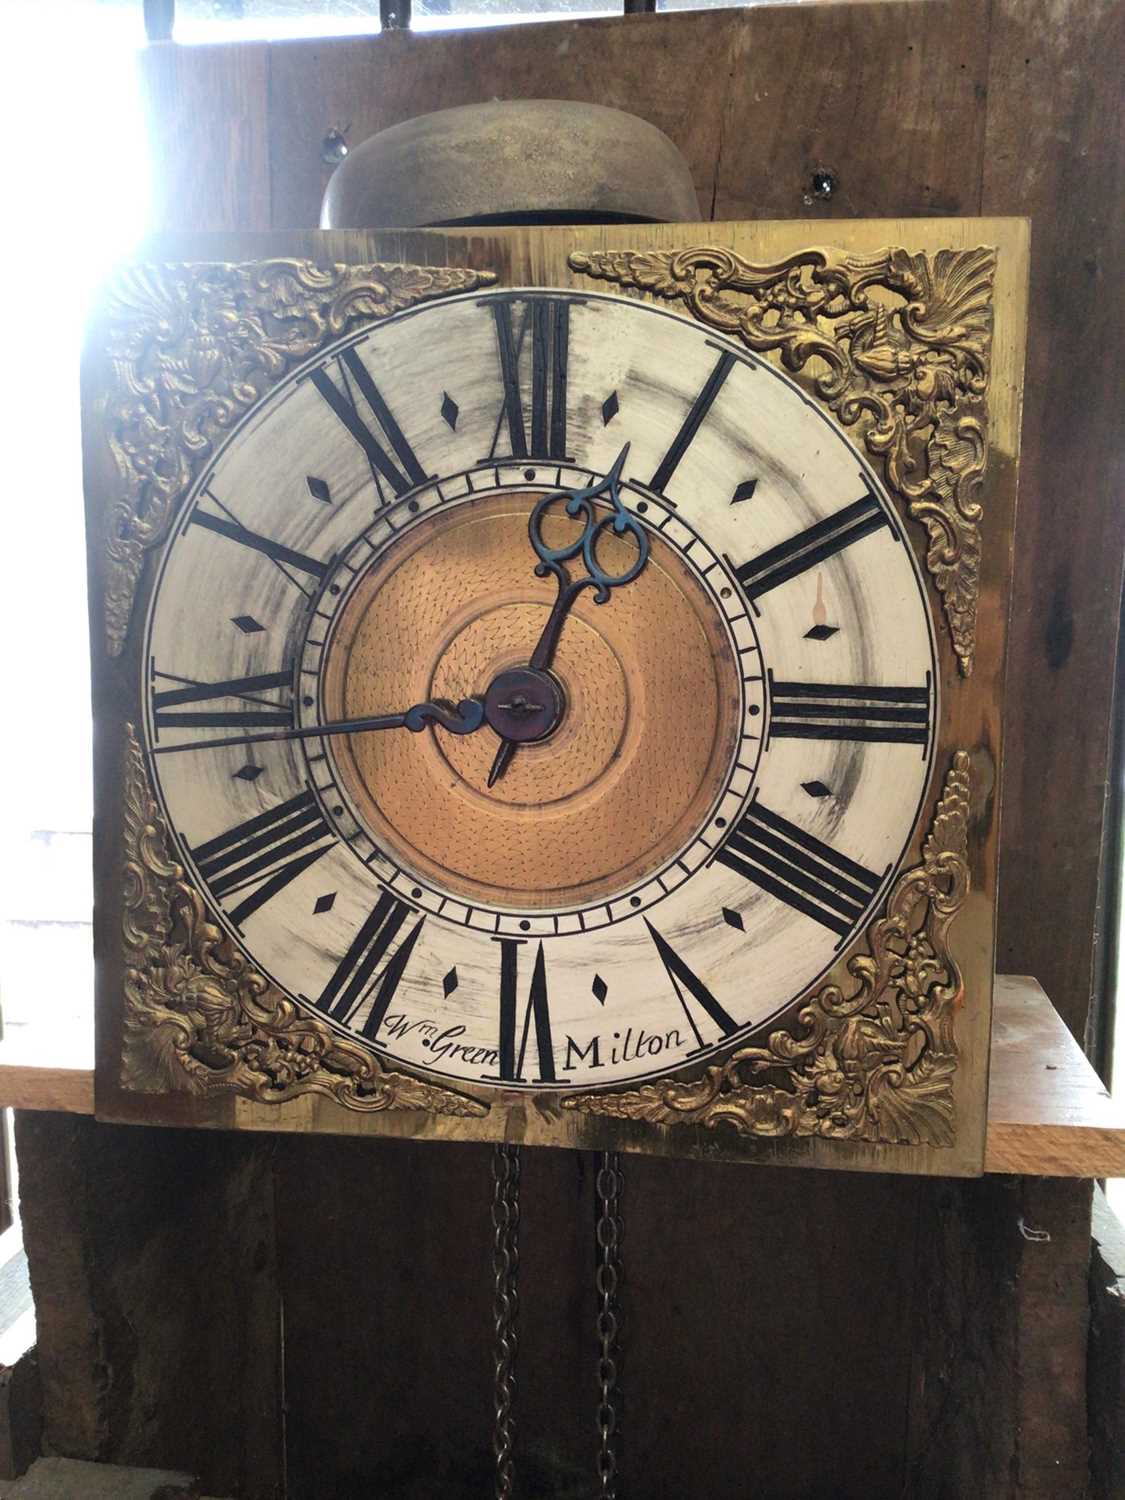 Early 18th century longcase clock by Wm. Green of Milton, 30 hour movement, with square dial, weight - Image 4 of 6